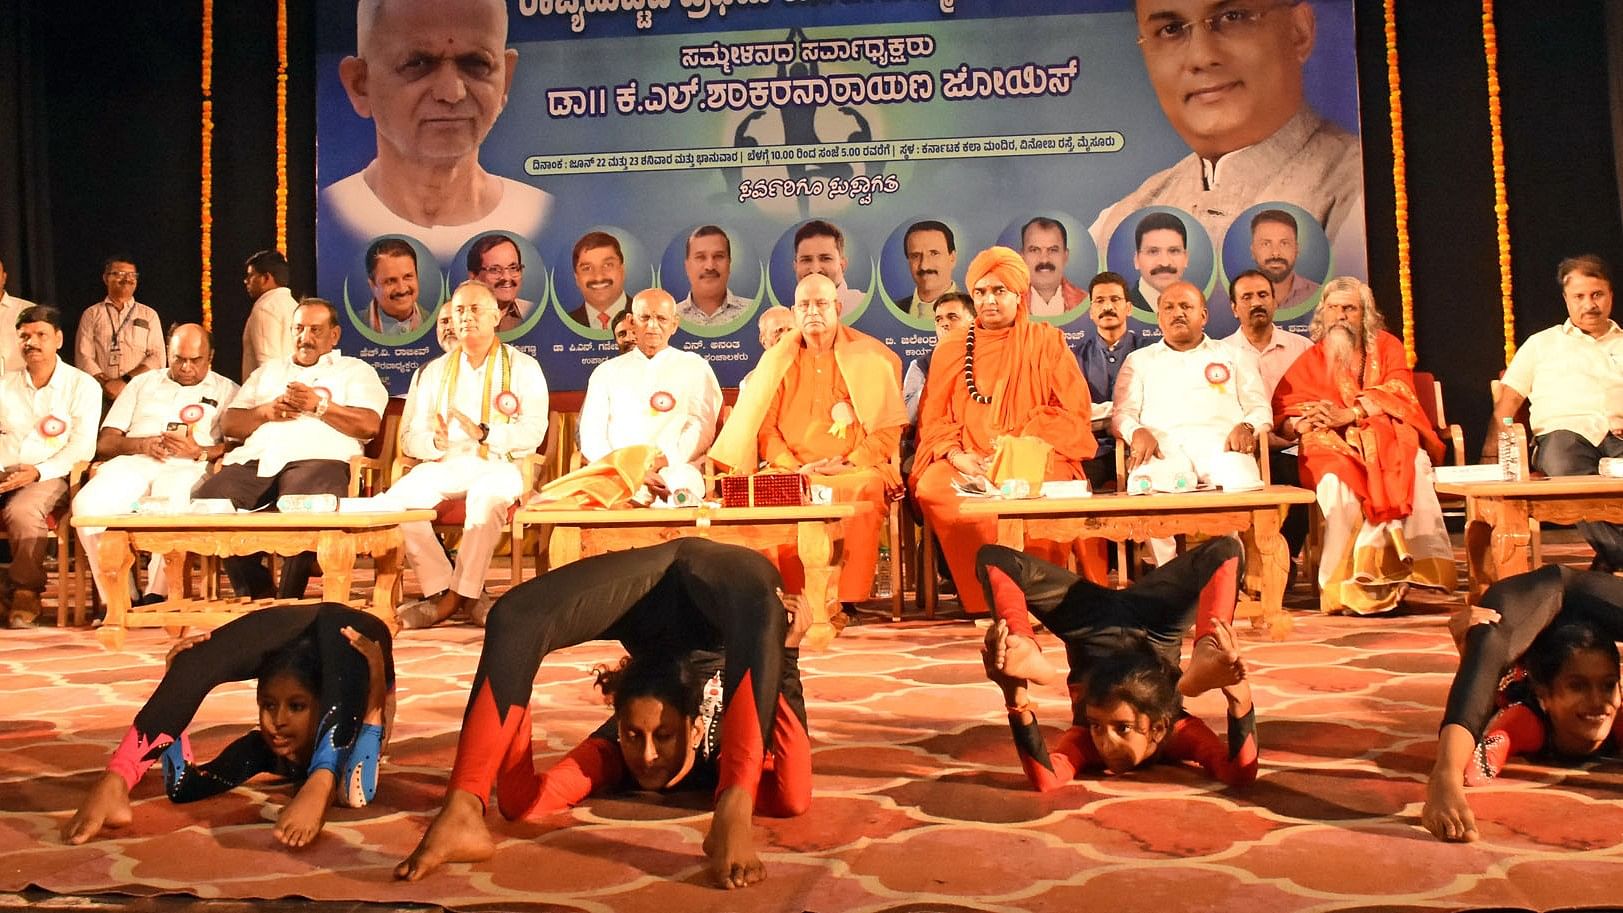 <div class="paragraphs"><p> Students perform Yoga at the inaugural event of State level Yoga conference hosted by 'Karnataka Yoga Shikshakara Vokkoota' in Mysuru on Saturday, in the presence of Minister for Health and Family Welfare Dinesh Gundu Rao and others.    </p></div>